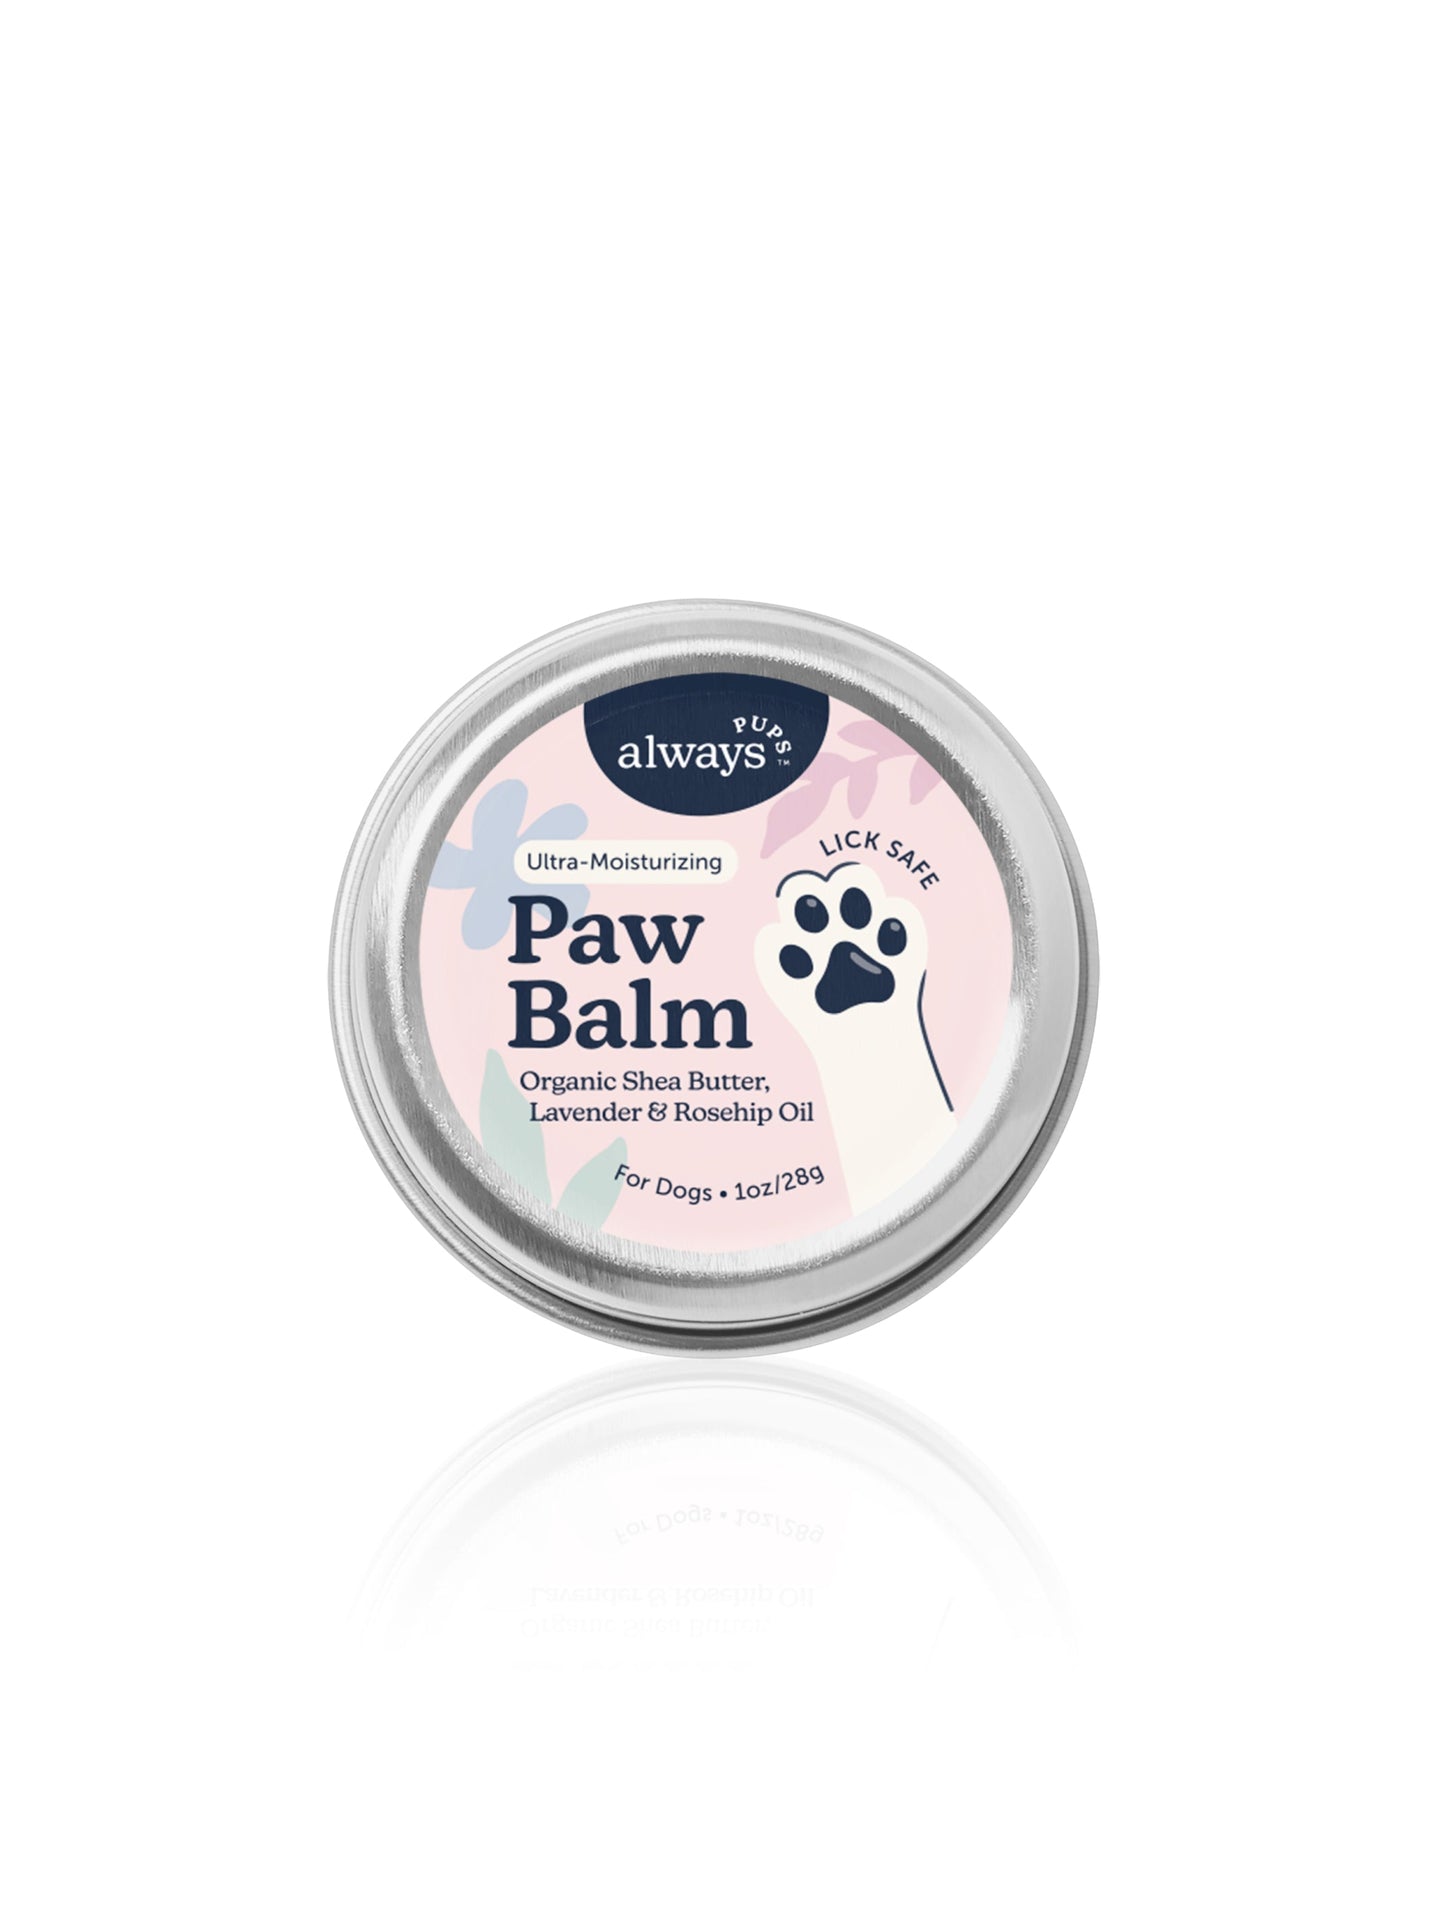 AlwaysPups All Natural Organic Paw Balm for Dogs - 1oz in a metal tin